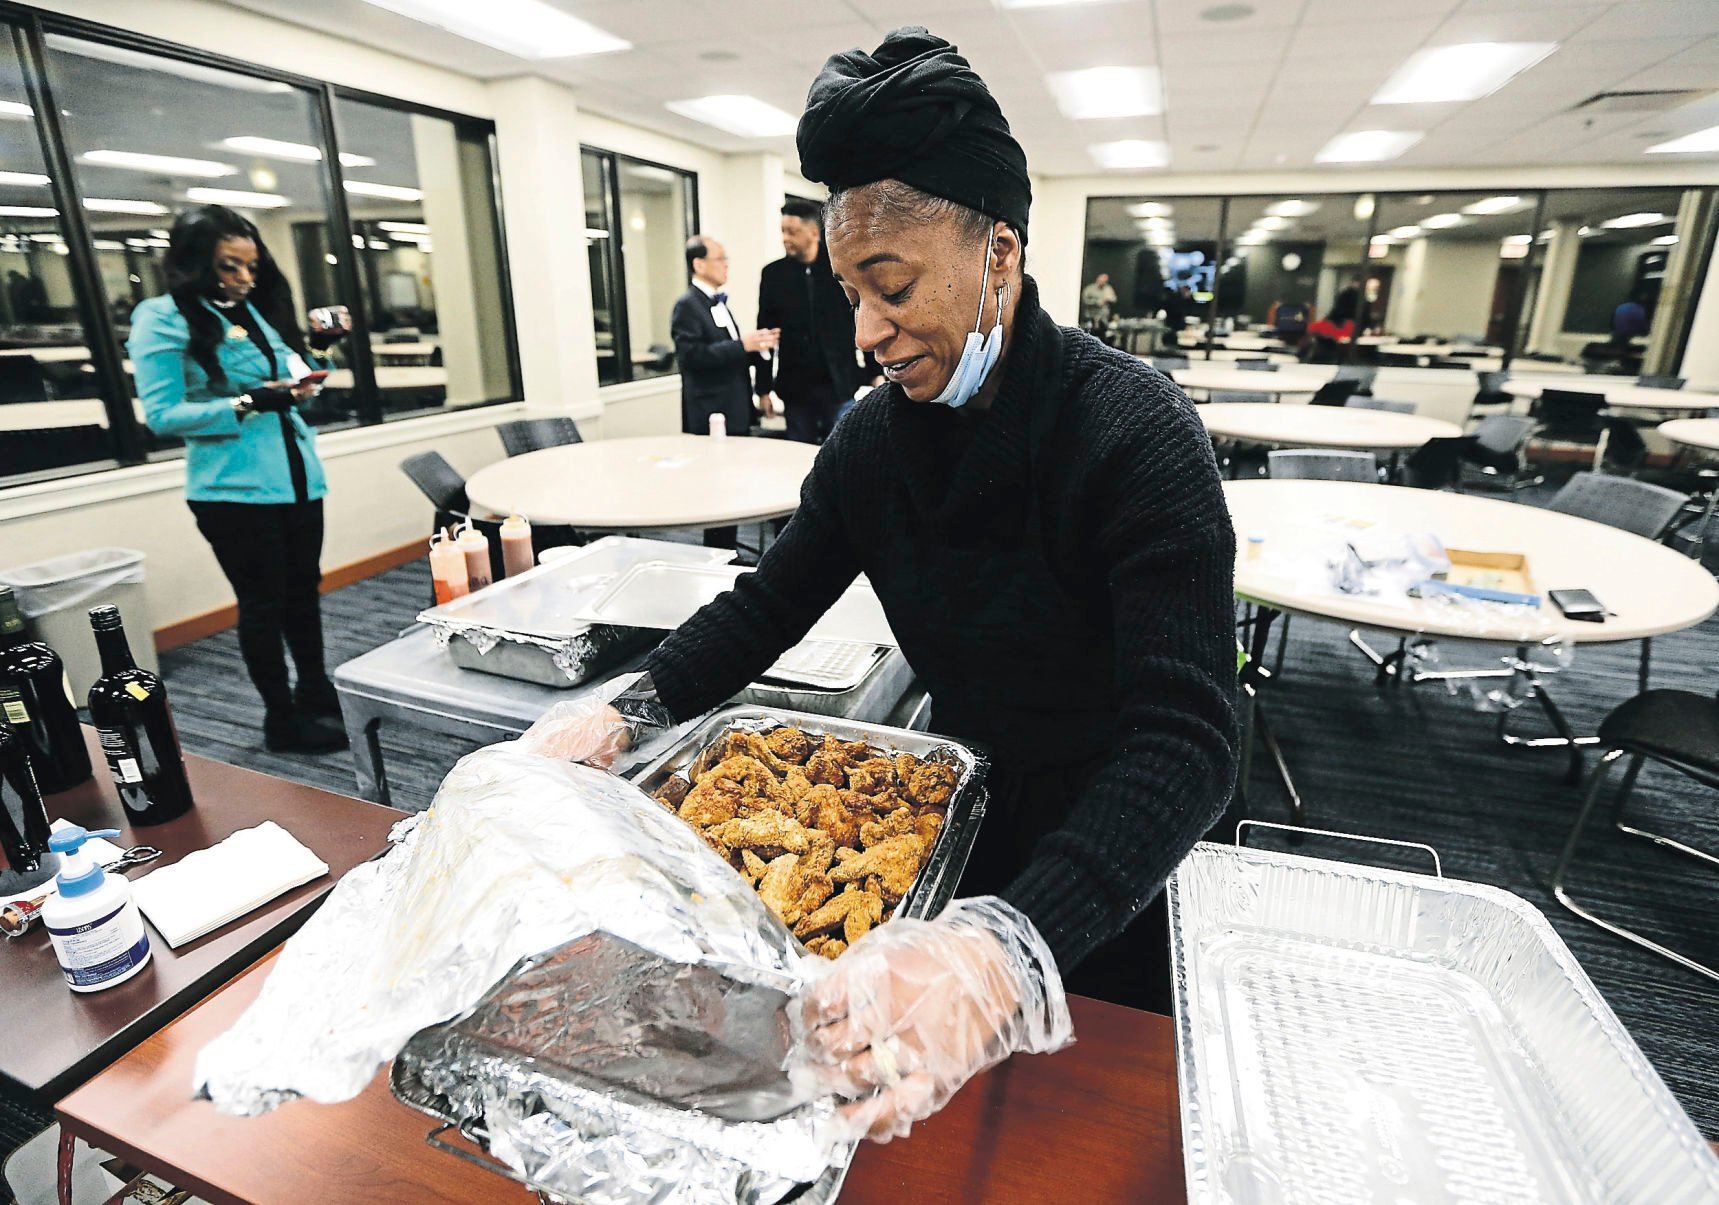 Francen Sanders, co-owner of Boaz BBQ in Dubuque, sets up food for a business mixer.    PHOTO CREDIT: Dave Kettering